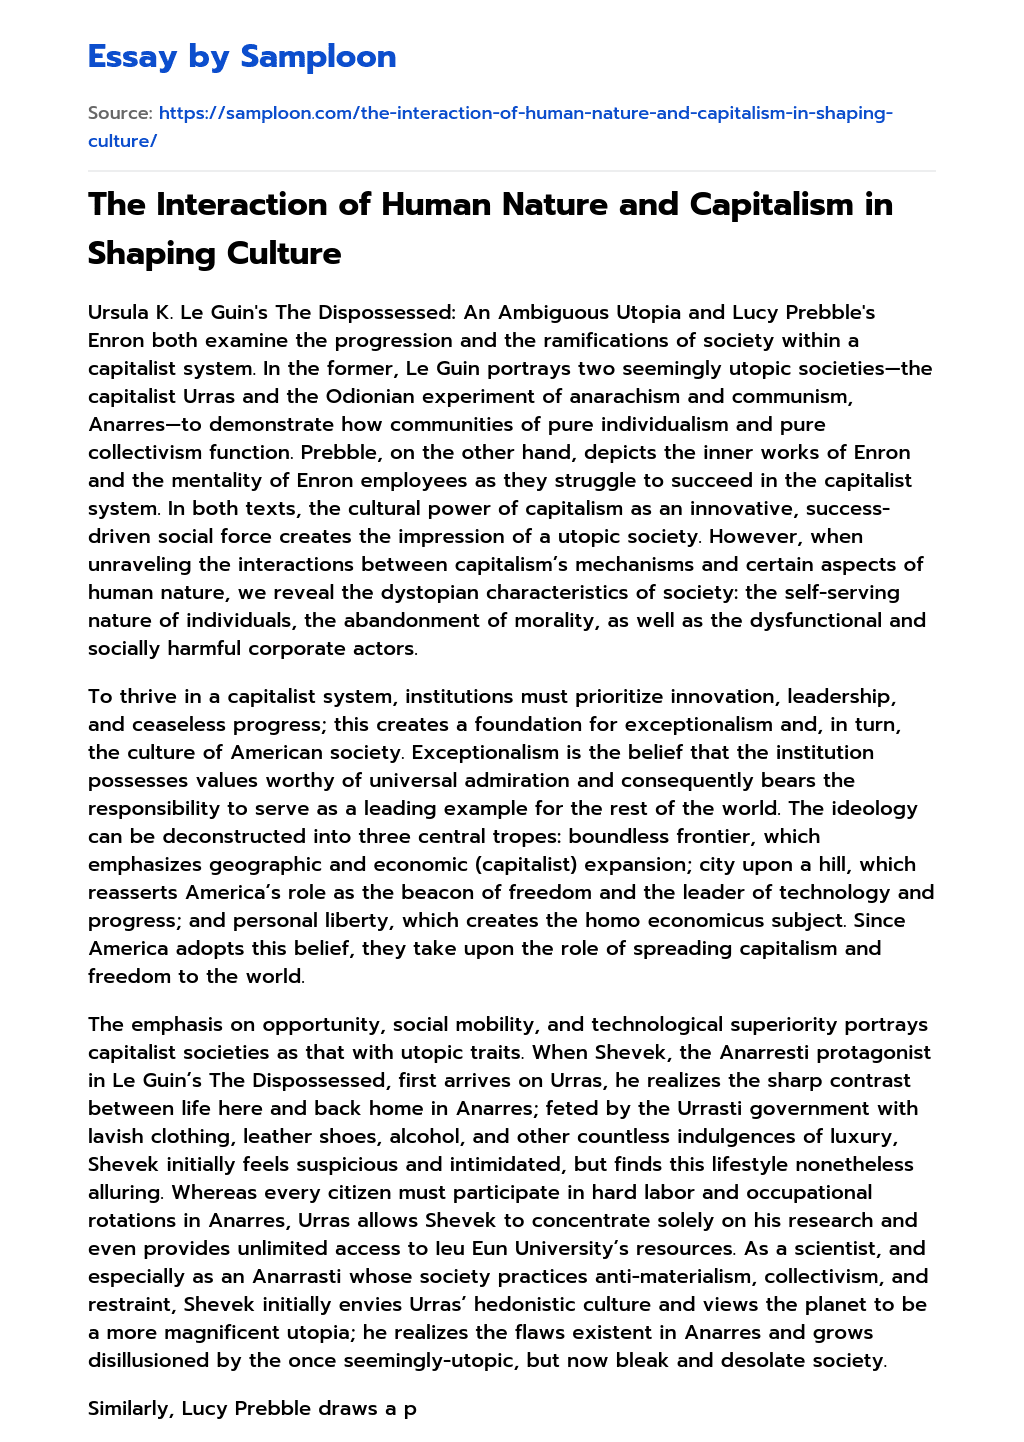 The Interaction of Human Nature and Capitalism in Shaping Culture essay